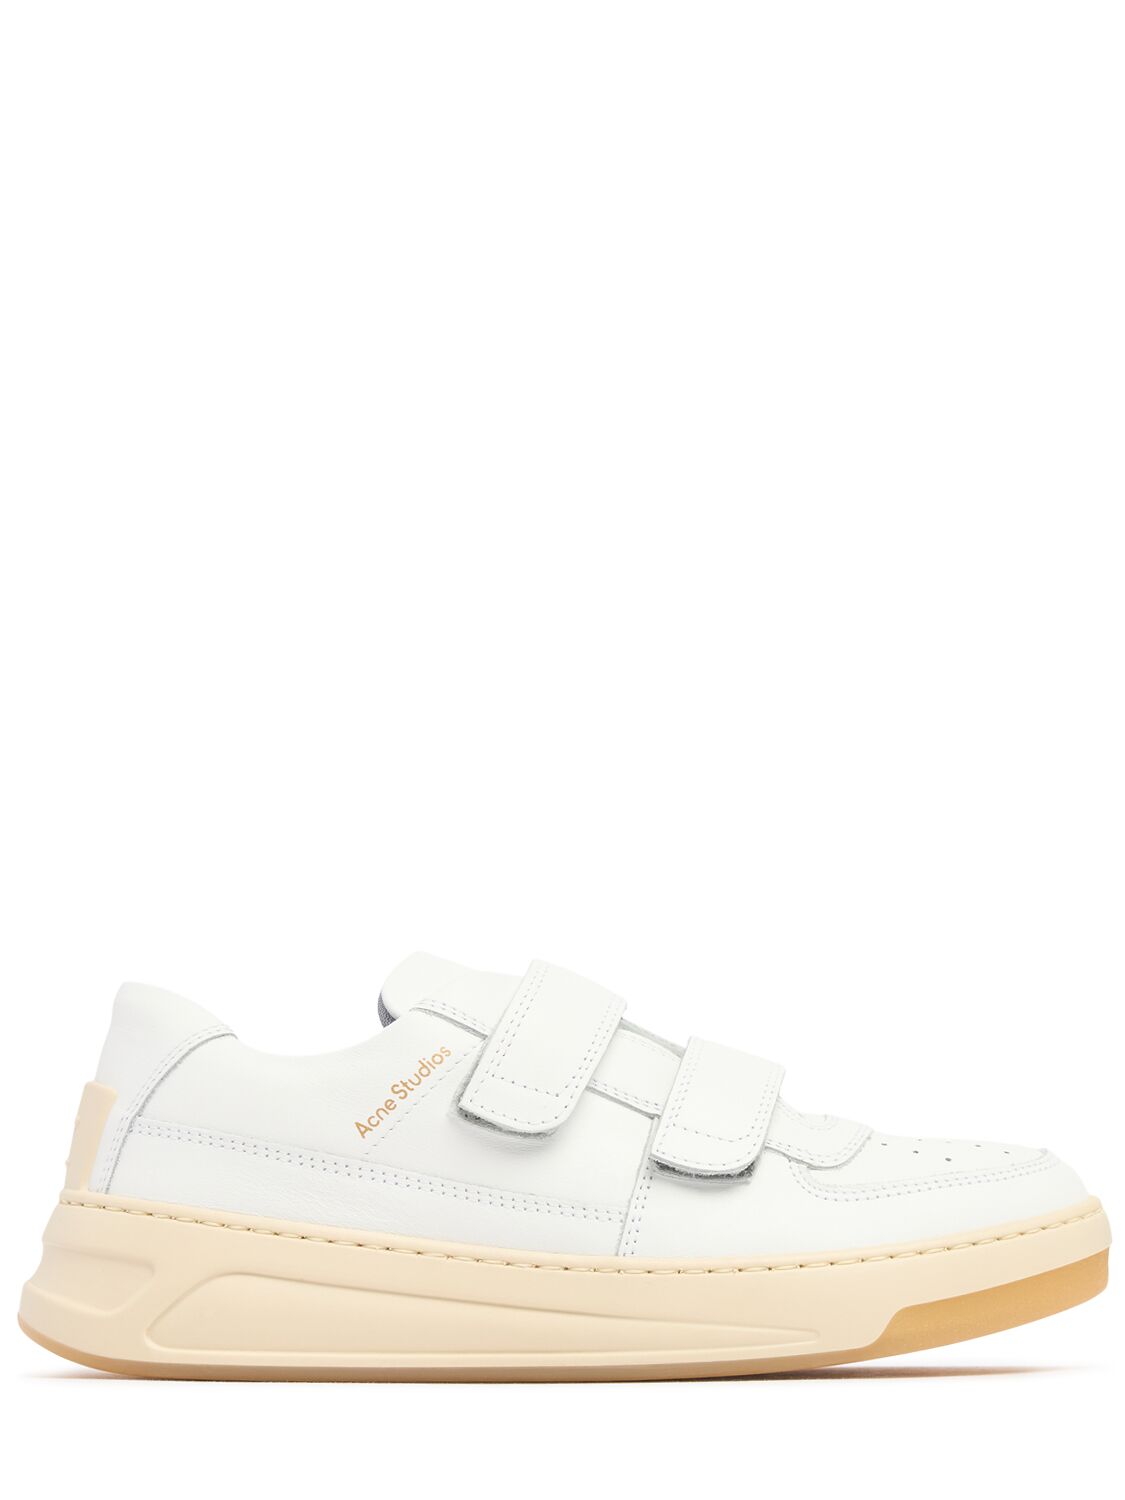 Acne Studios Steffey Leather Low Top Sneakers In Optic White/ecr